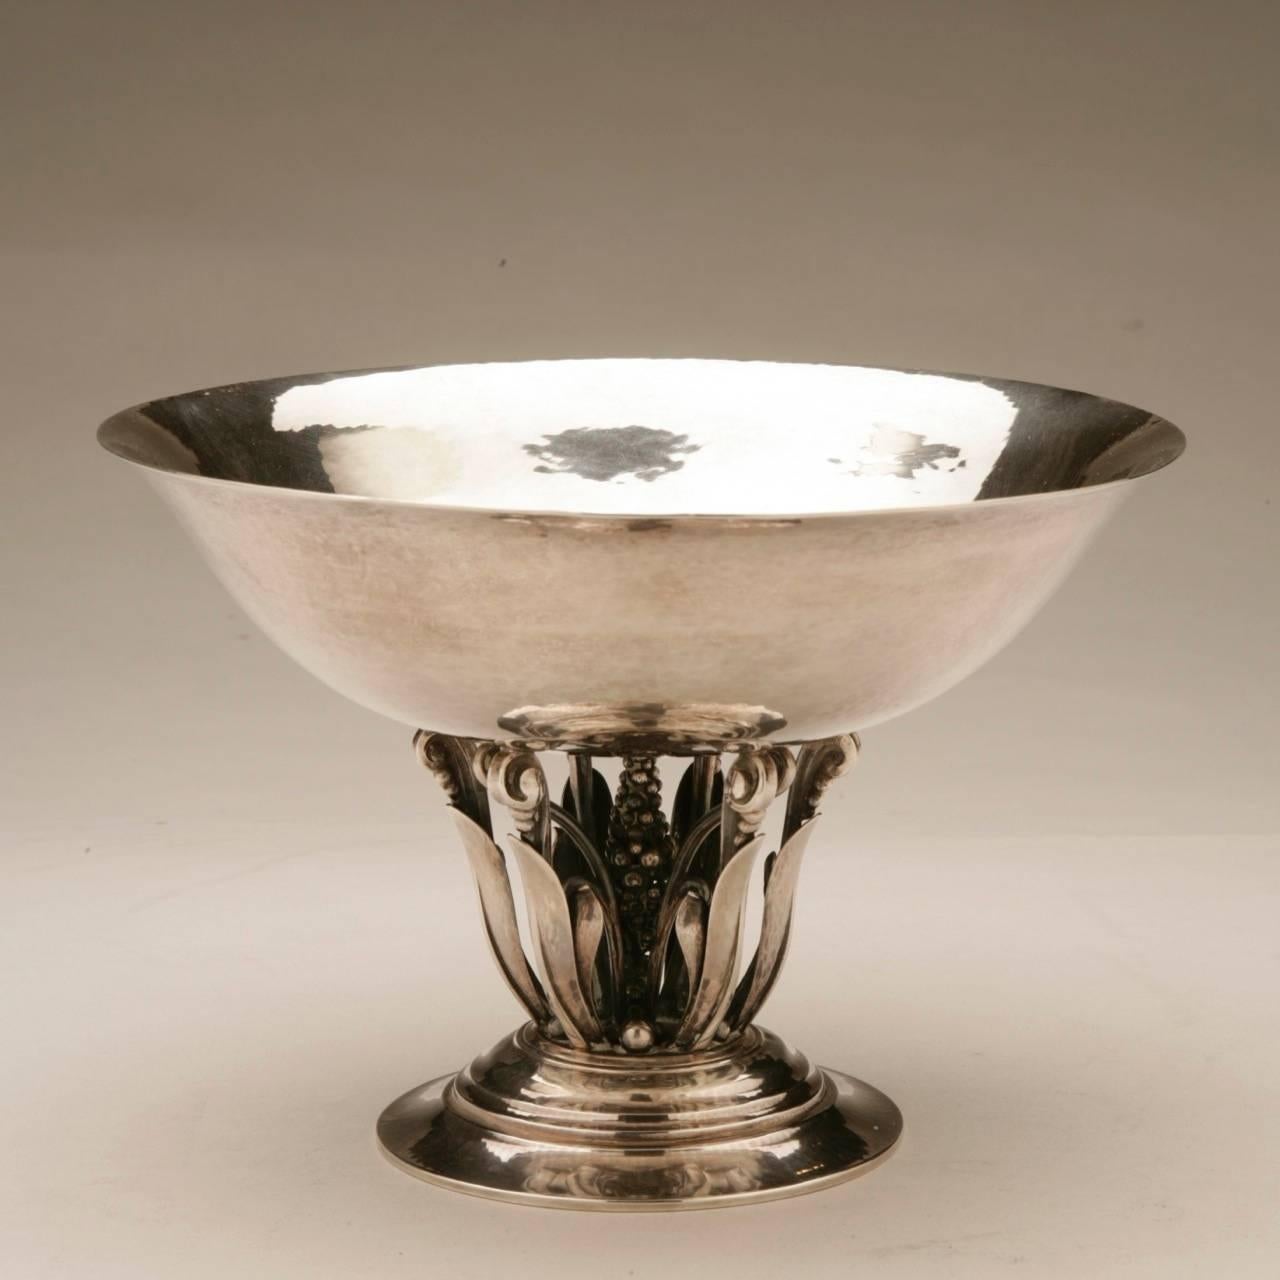 Art Nouveau Georg Jensen Sterling Silver Footed Bowl No. 171 by Johan Rohde